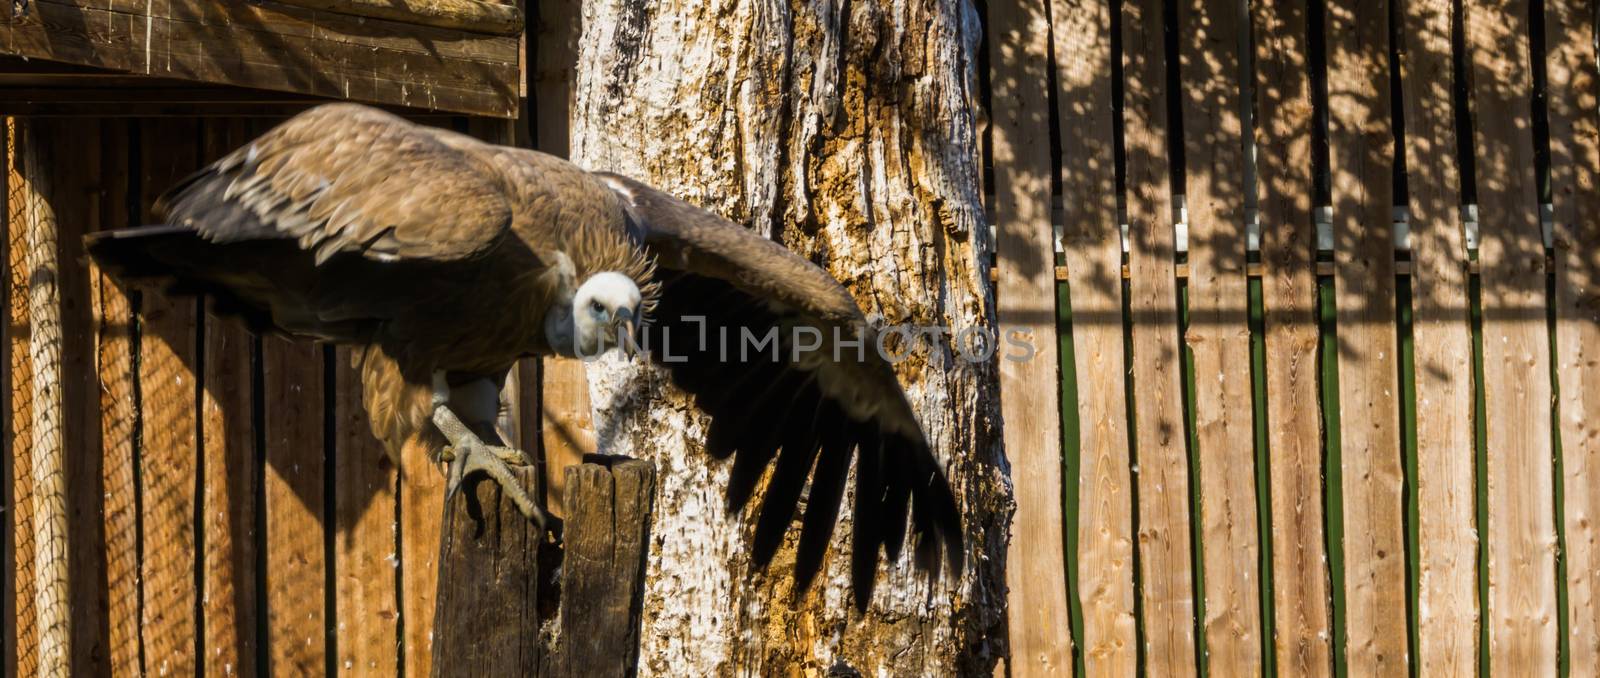 griffon vulture standing in a threatening pose, ready for take and spreading its wings